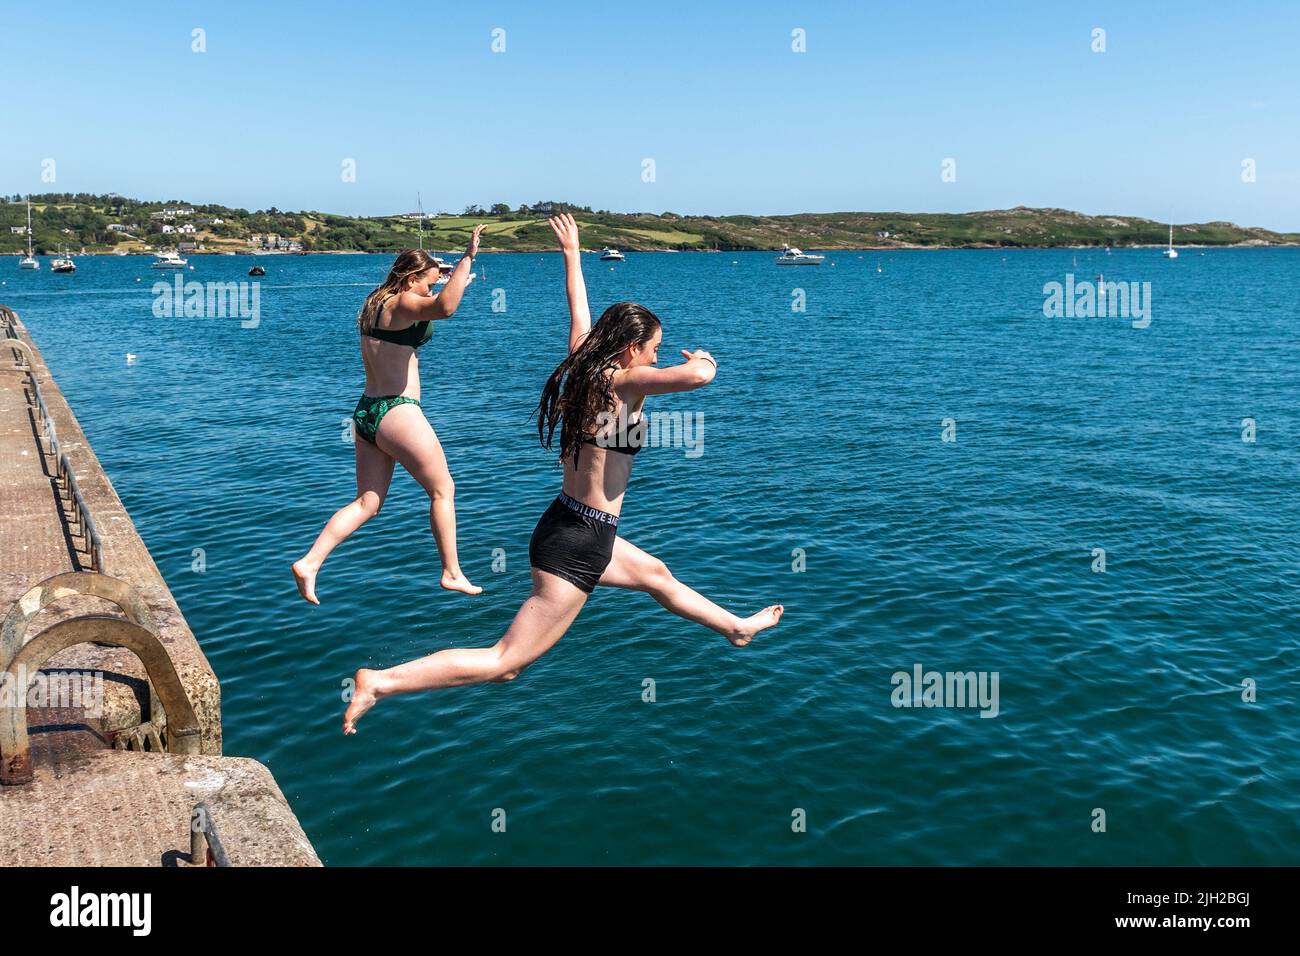 Schull, West Cork, Ireland. 14th July, 2022. The temperatures in West Cork hit 23C today, with many people heading for the coast to cool off. Jumping off Schull pier to cool down were Amelia Davies from Durrus and Amy Wilde from Schull. Credit: AG News/Alamy Live News Stock Photo